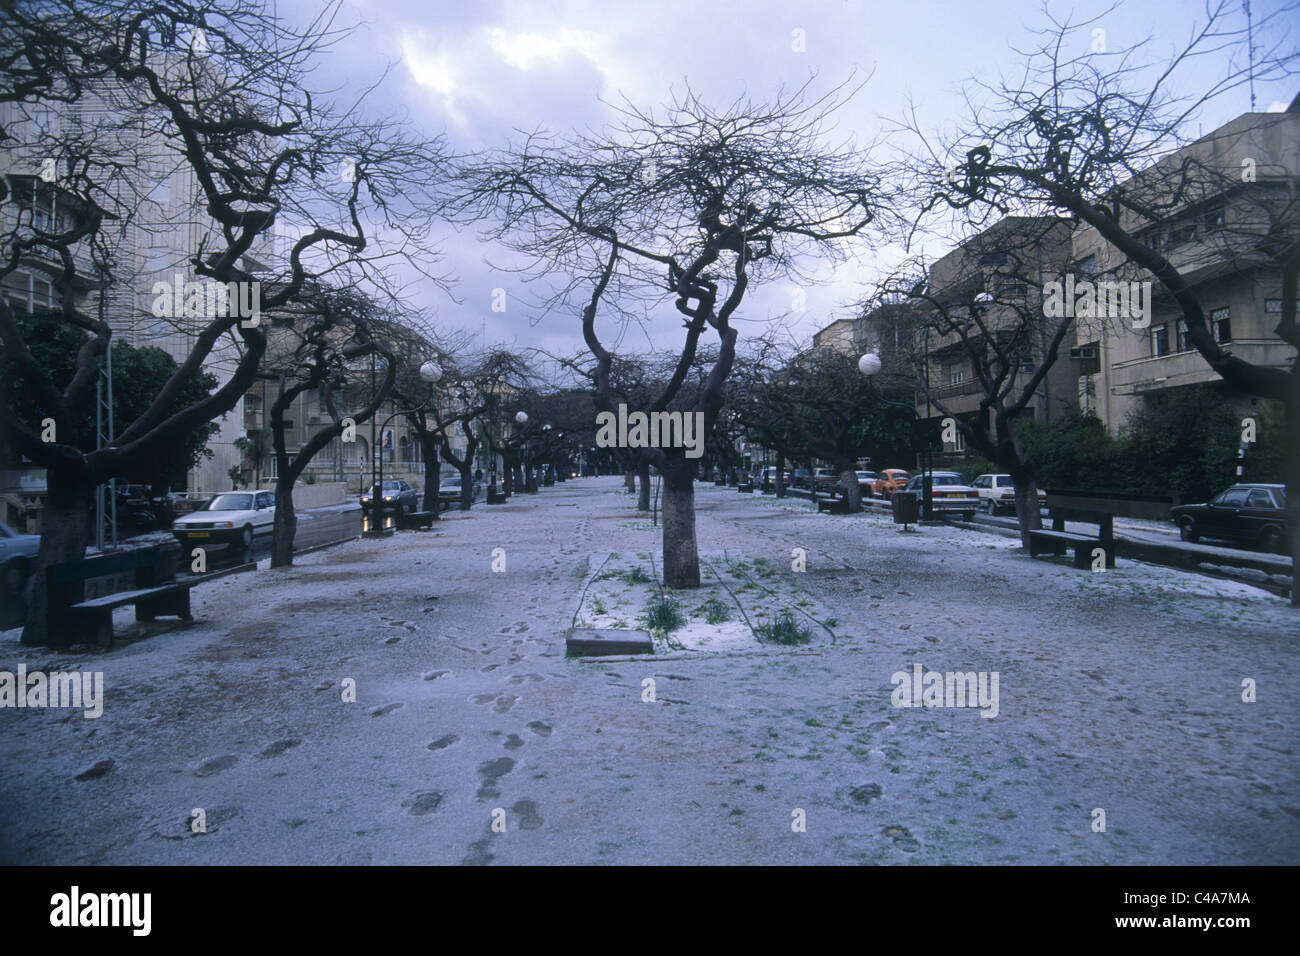 Photograph of the Rothschild Boulevard after a hail storm Stock Photo